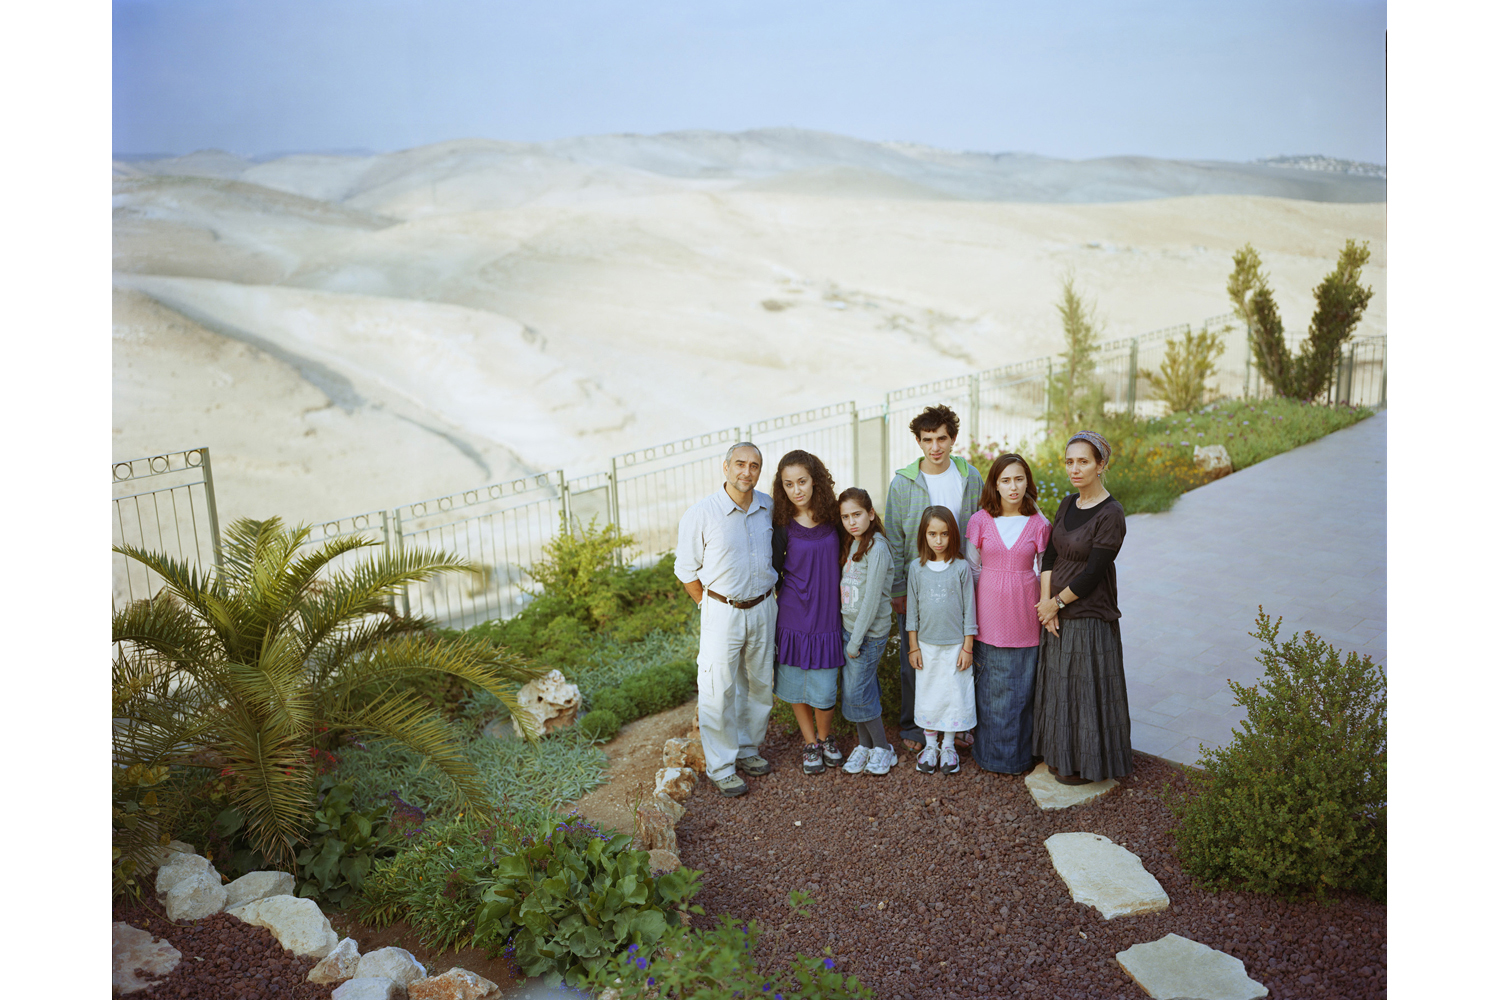 Ma'ale Addumin from the series Settlement.